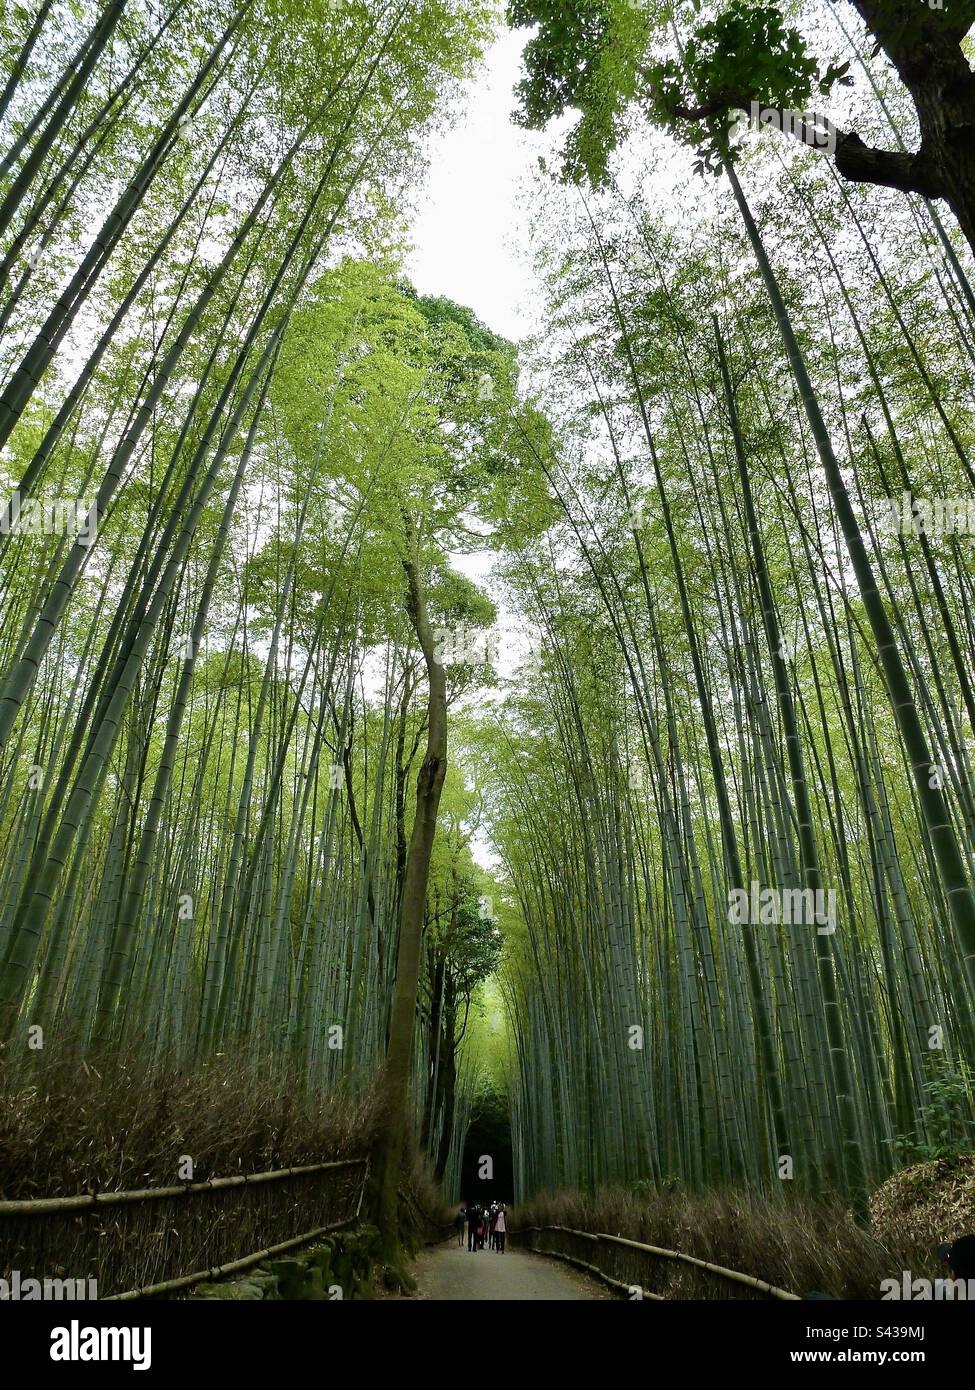 Extremely tall bamboo canes flank the footpath in the Kyoto bamboo grove, Japan Stock Photo